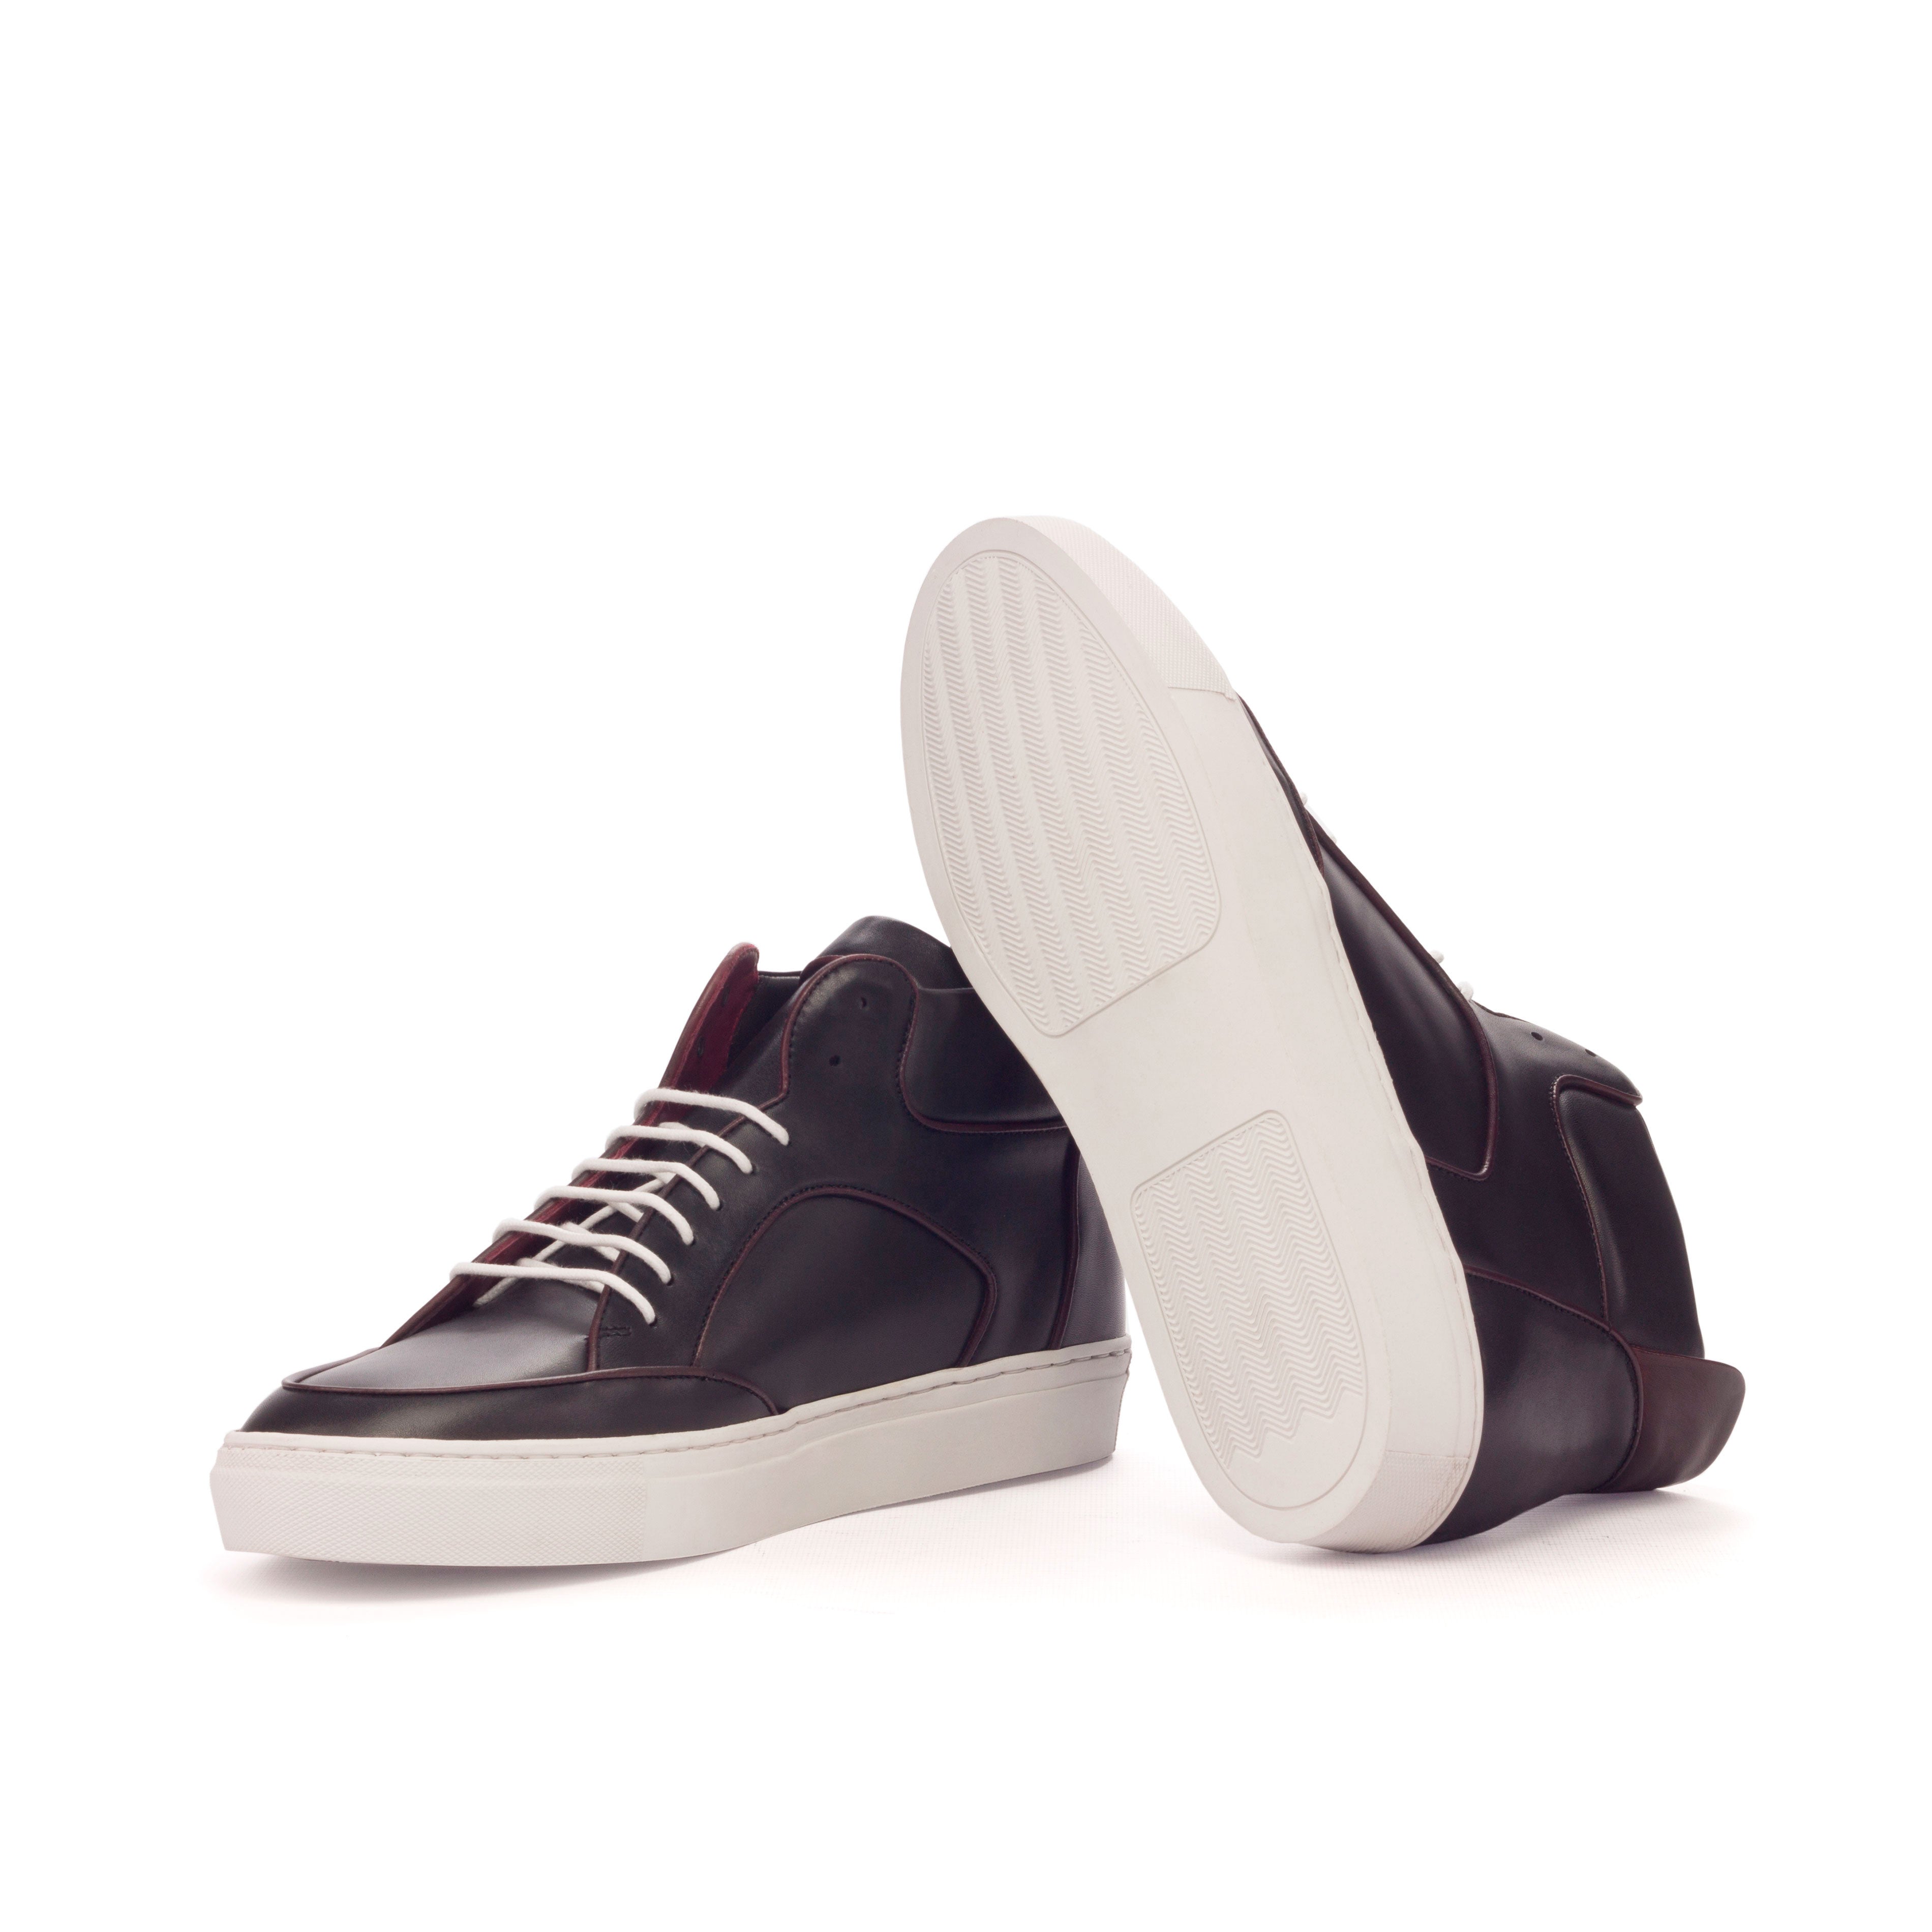 High Sneakers black & bordeaux leather